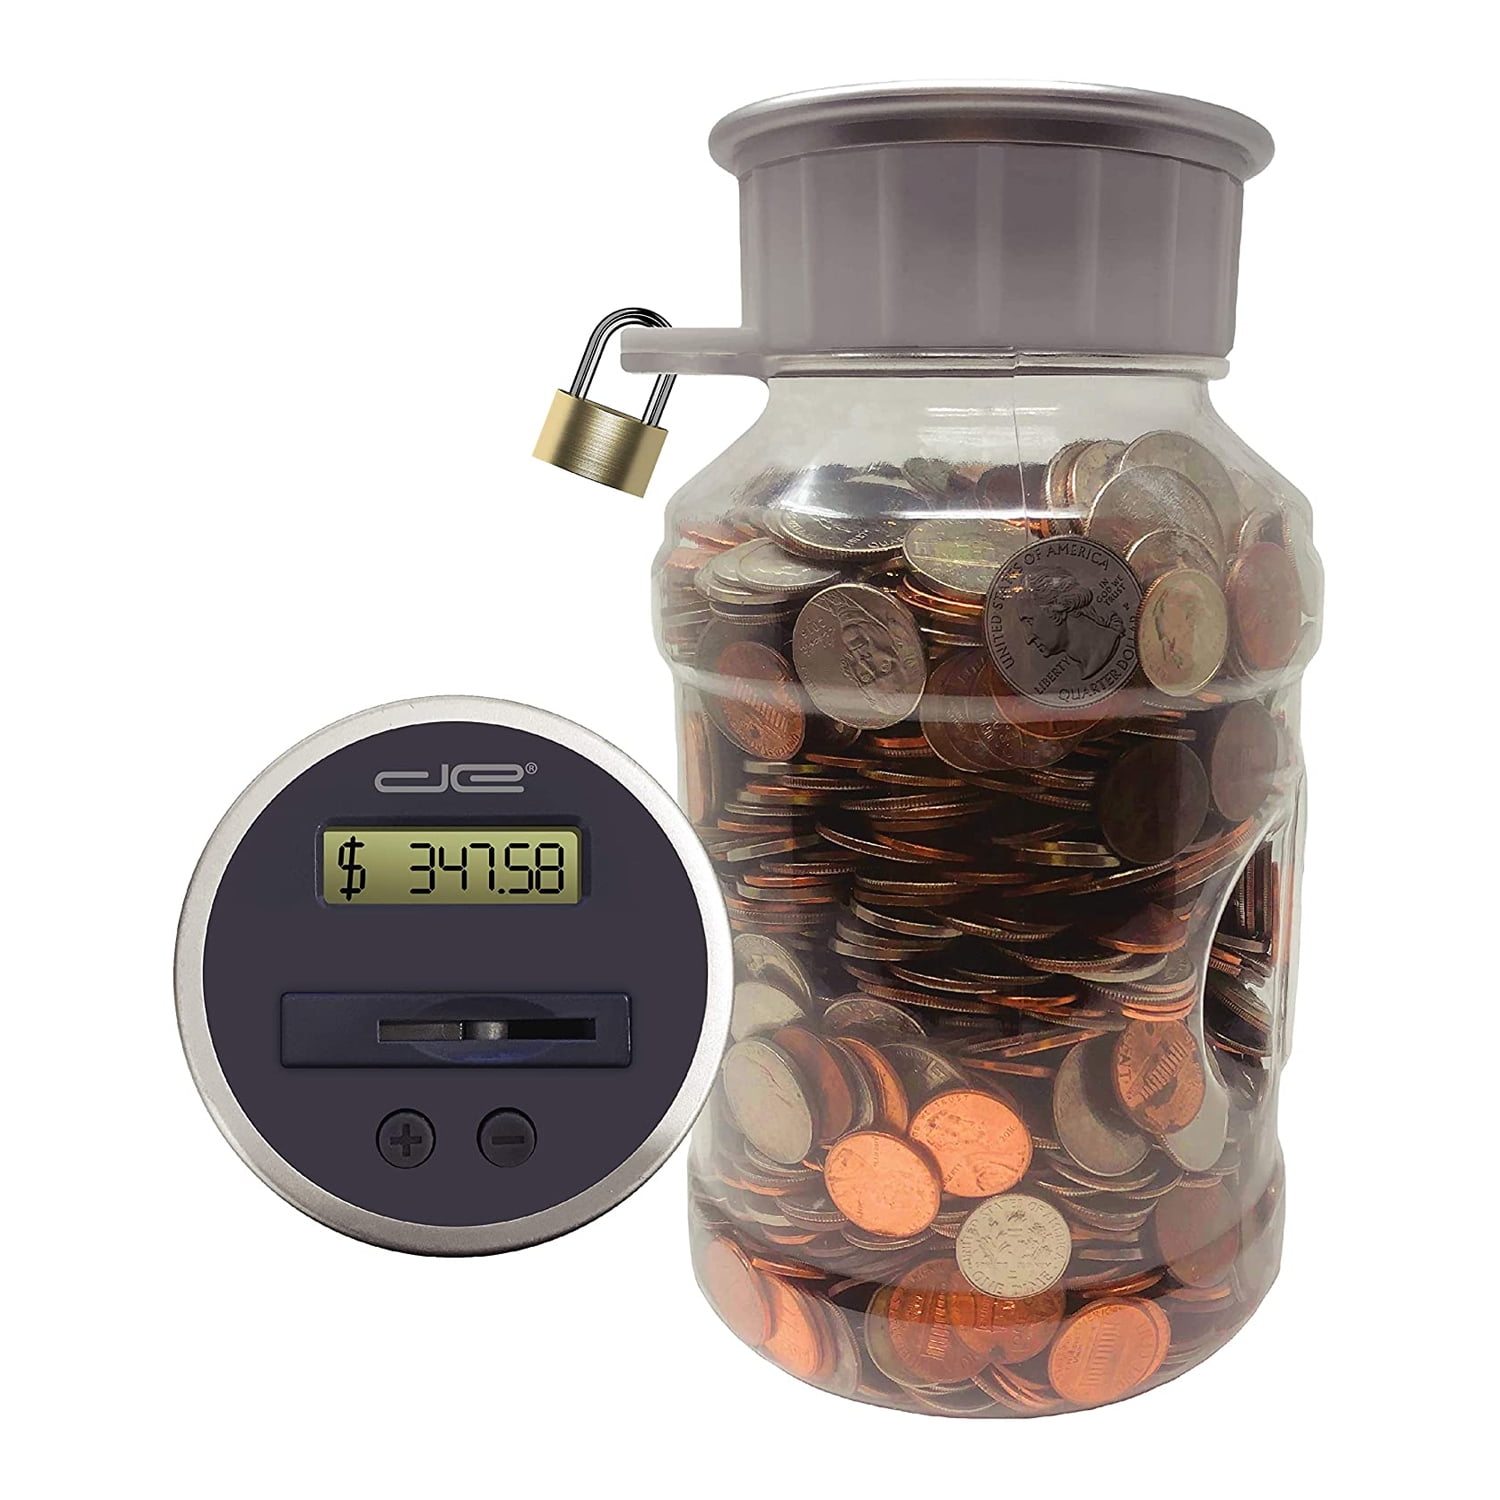 DIGITAL COIN COUNTER AND SORTER MONEY JAR CHANGE COUNTING MACHINE LCD DISPLAY 